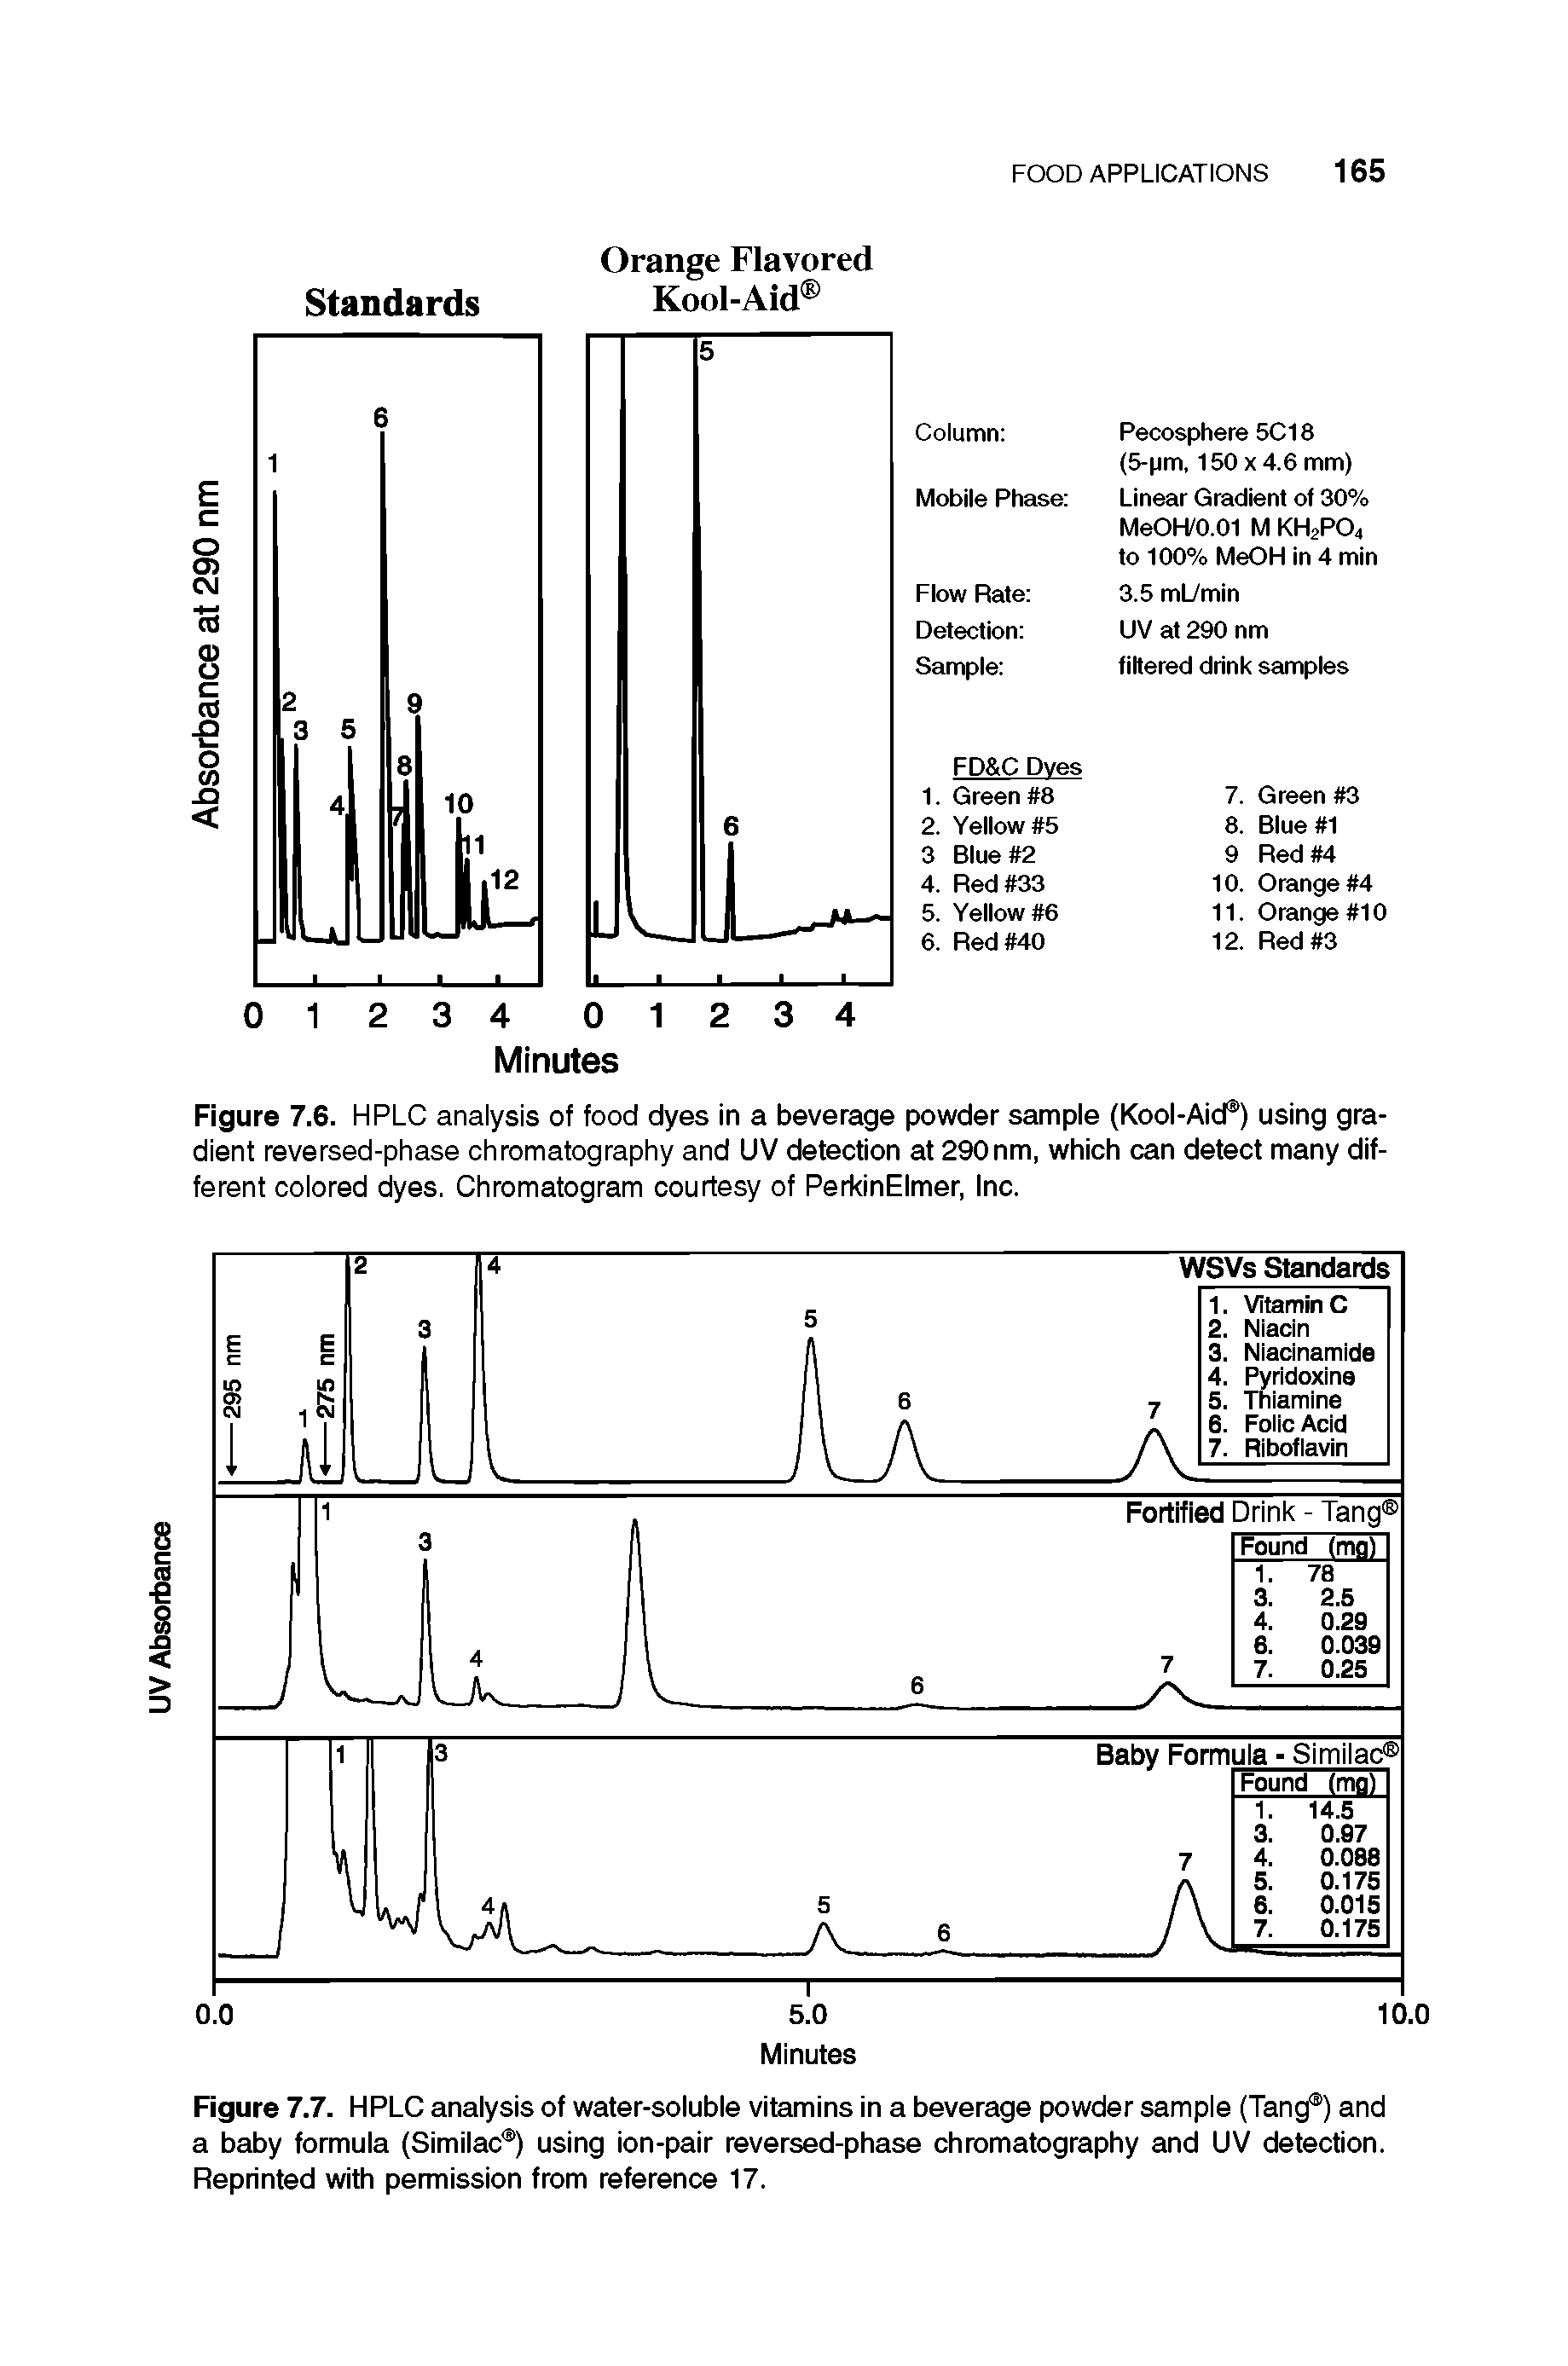 Figure 7.6. HPLC analysis of food dyes in a beverage powder sample (Kool-Aid ) using gradient reversed-phase chromatography and UV detection at 290nm, which can detect many different colored dyes. Chromatogram courtesy of PerkinElmer, Inc.